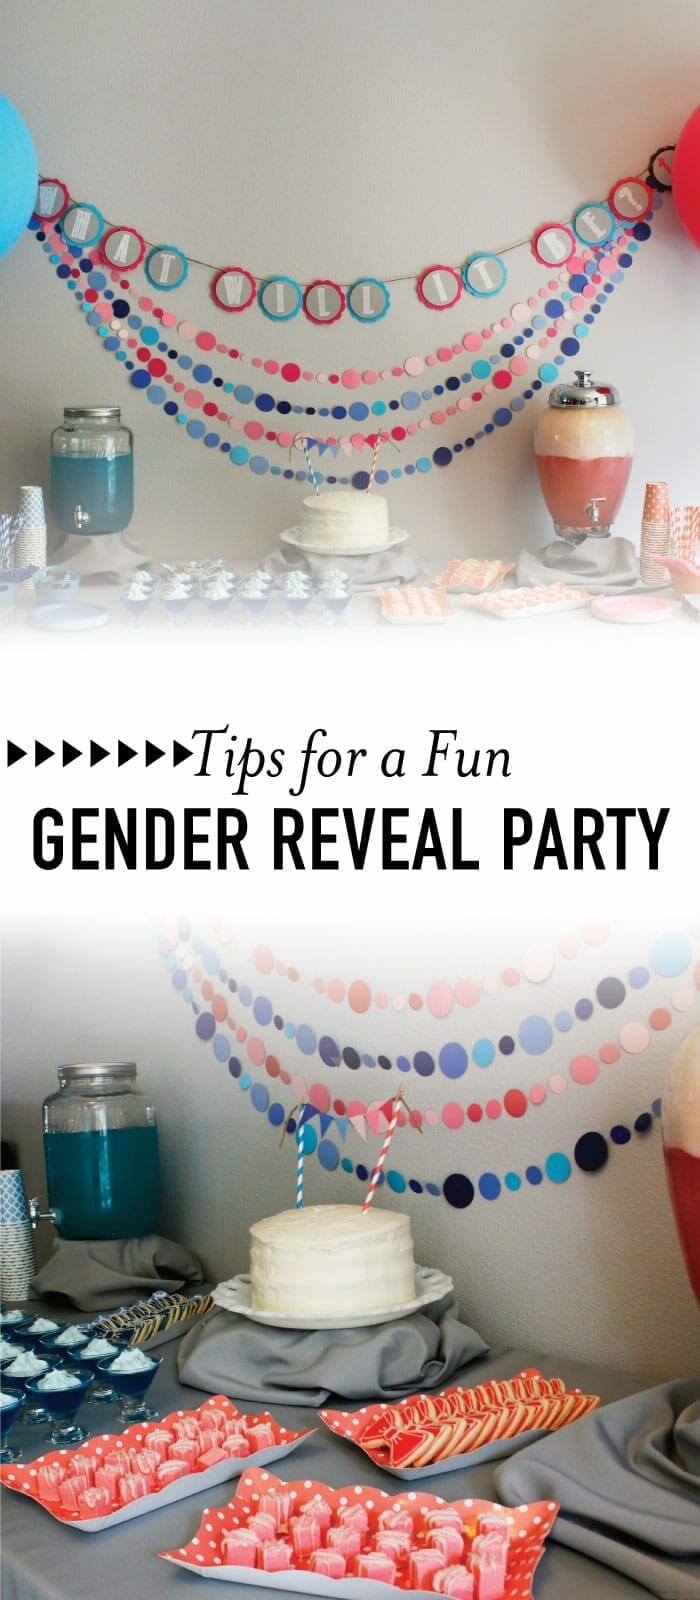 tips-for-a-diy-gender-reveal-party